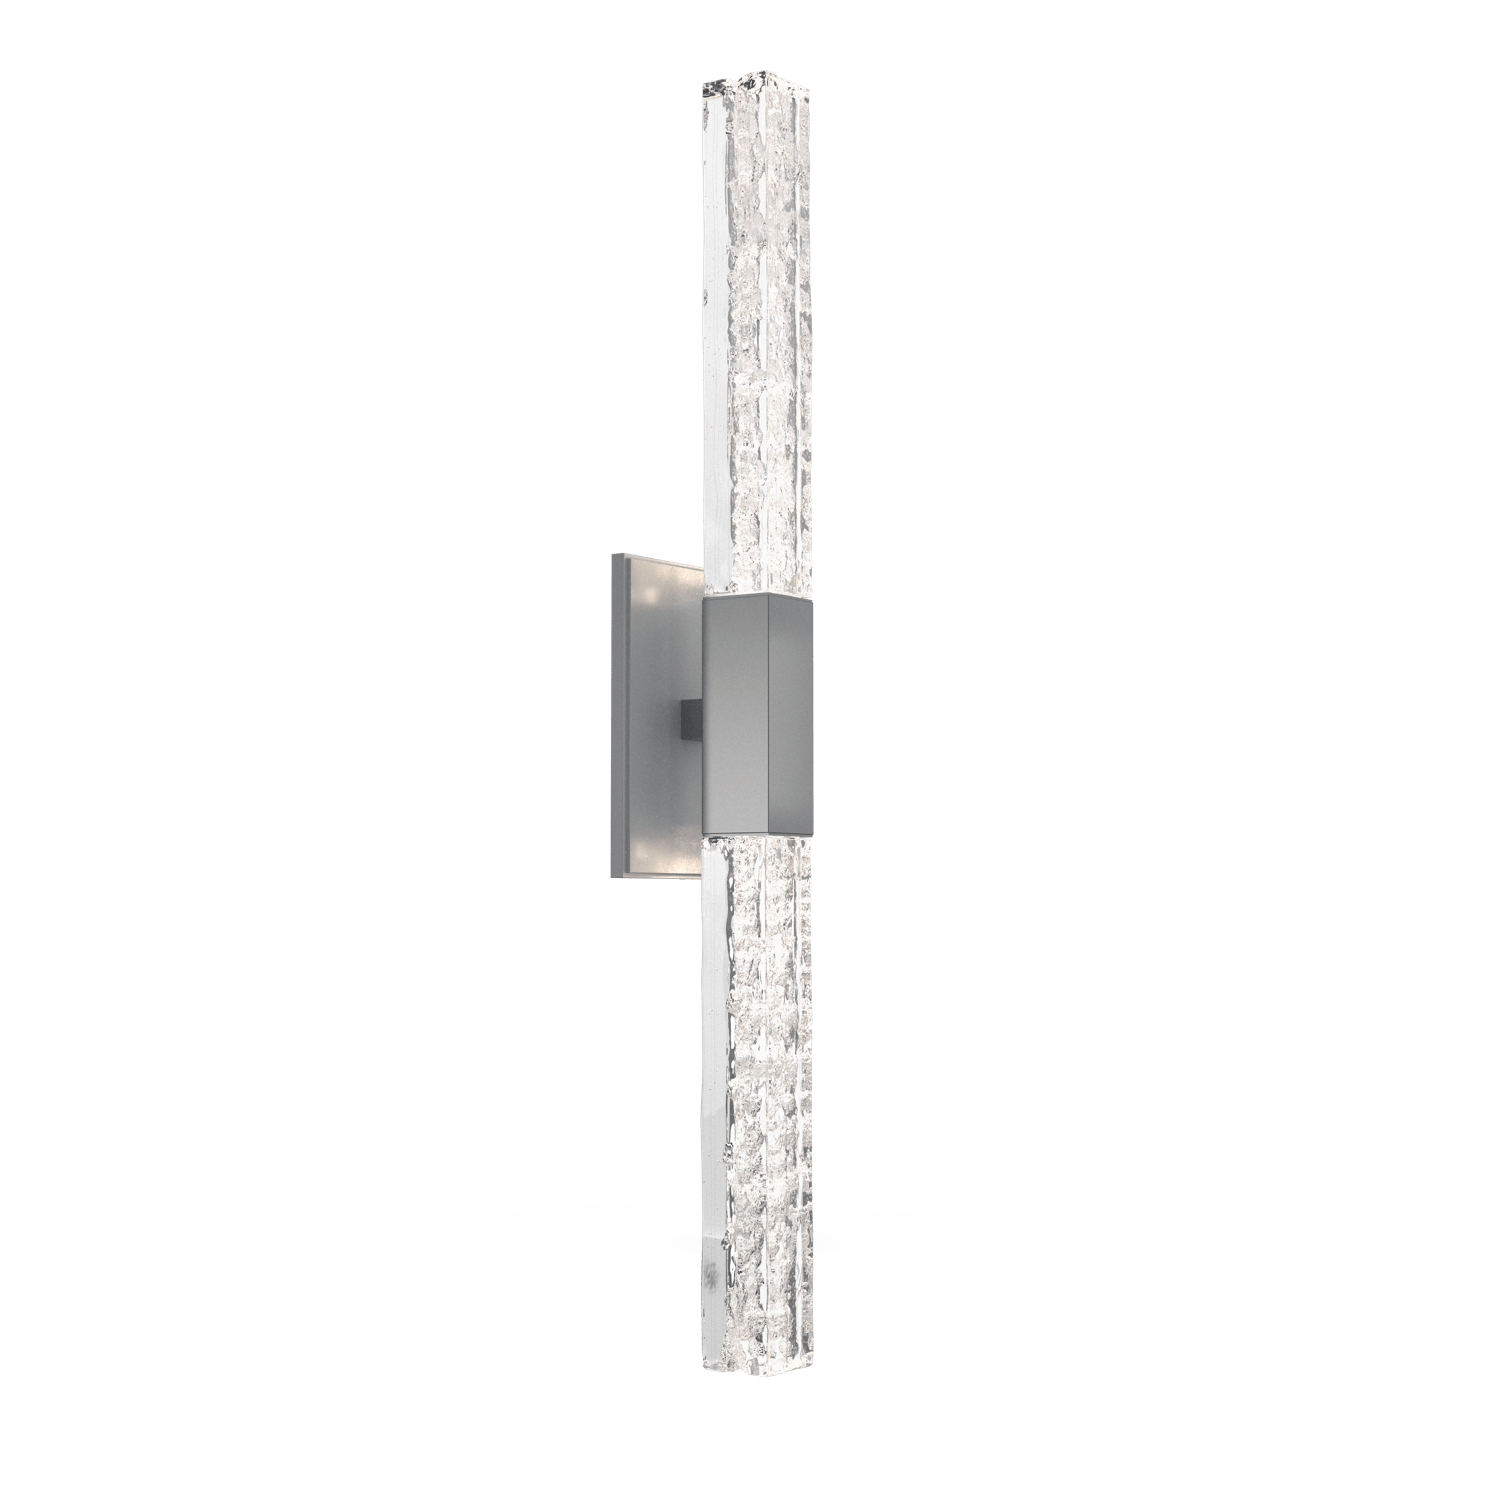 IDB0060-02-CS-GC-Hammerton-Studio-Axis-Double-Wall-Sconce-with-Classic-Silver-finish-and-clear-cast-glass-and-LED-lamping